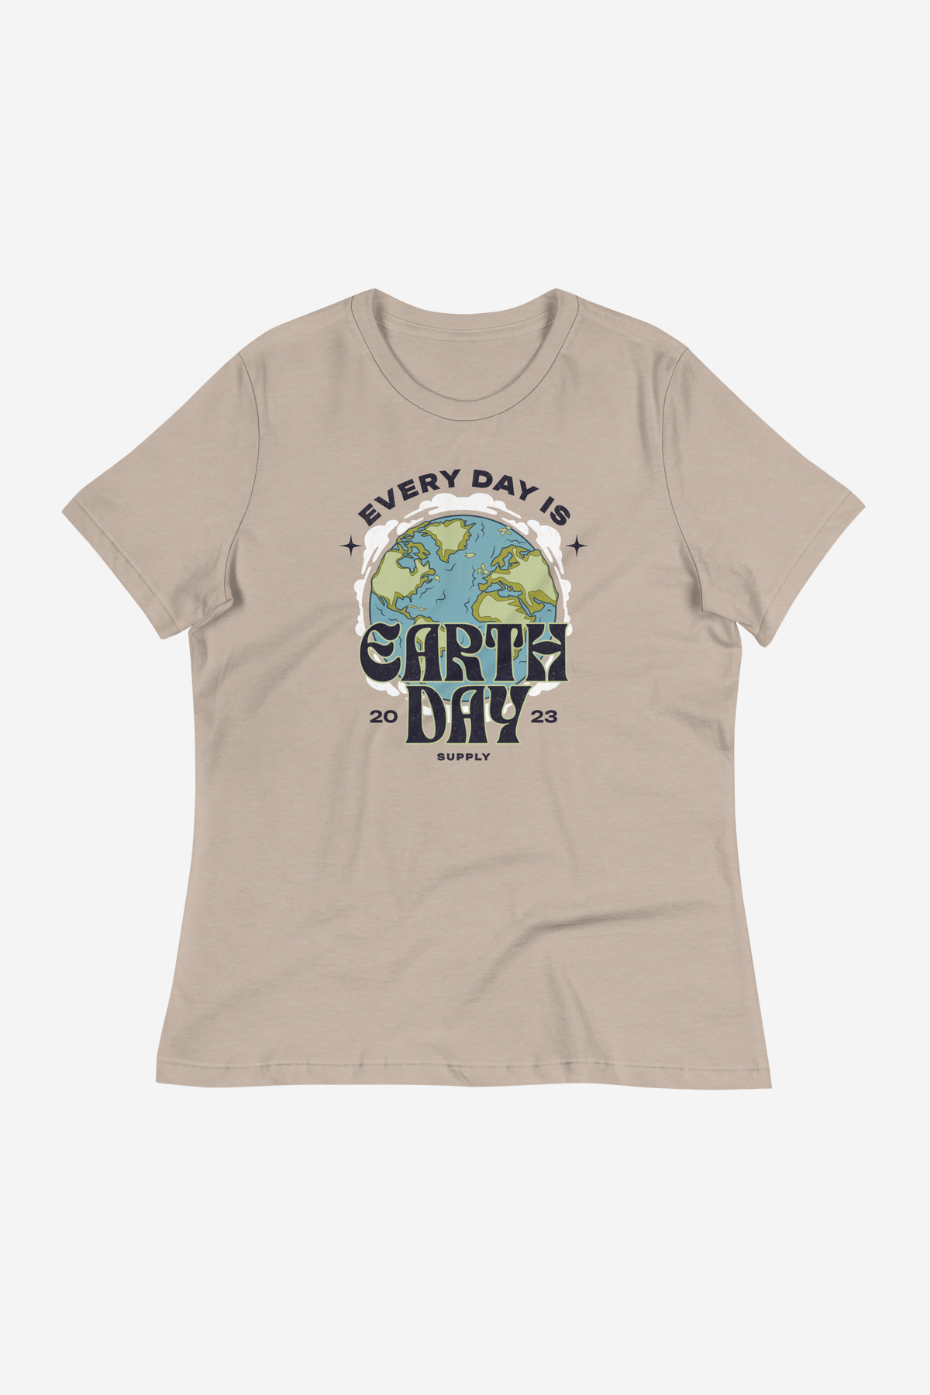 Every day is Earth Day Women's Relaxed T-Shirt